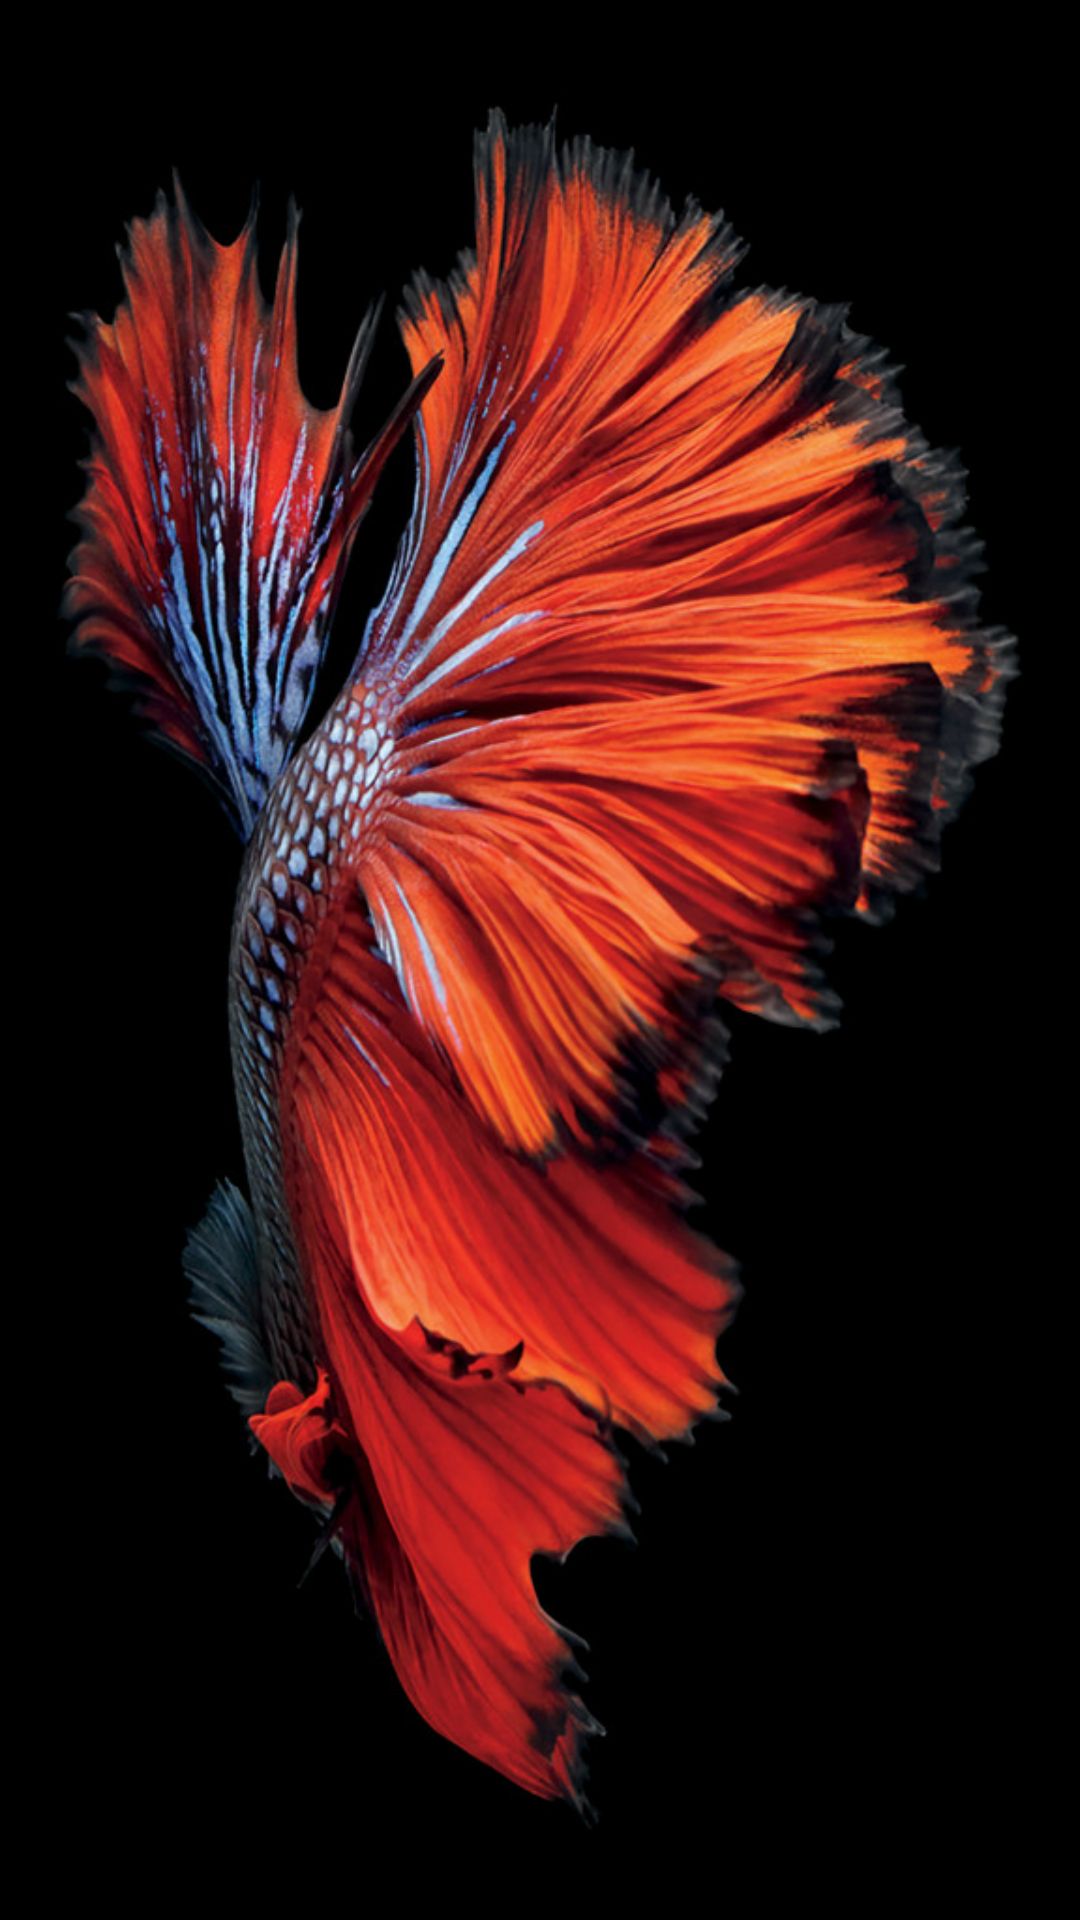 Red Fish Wallpapers